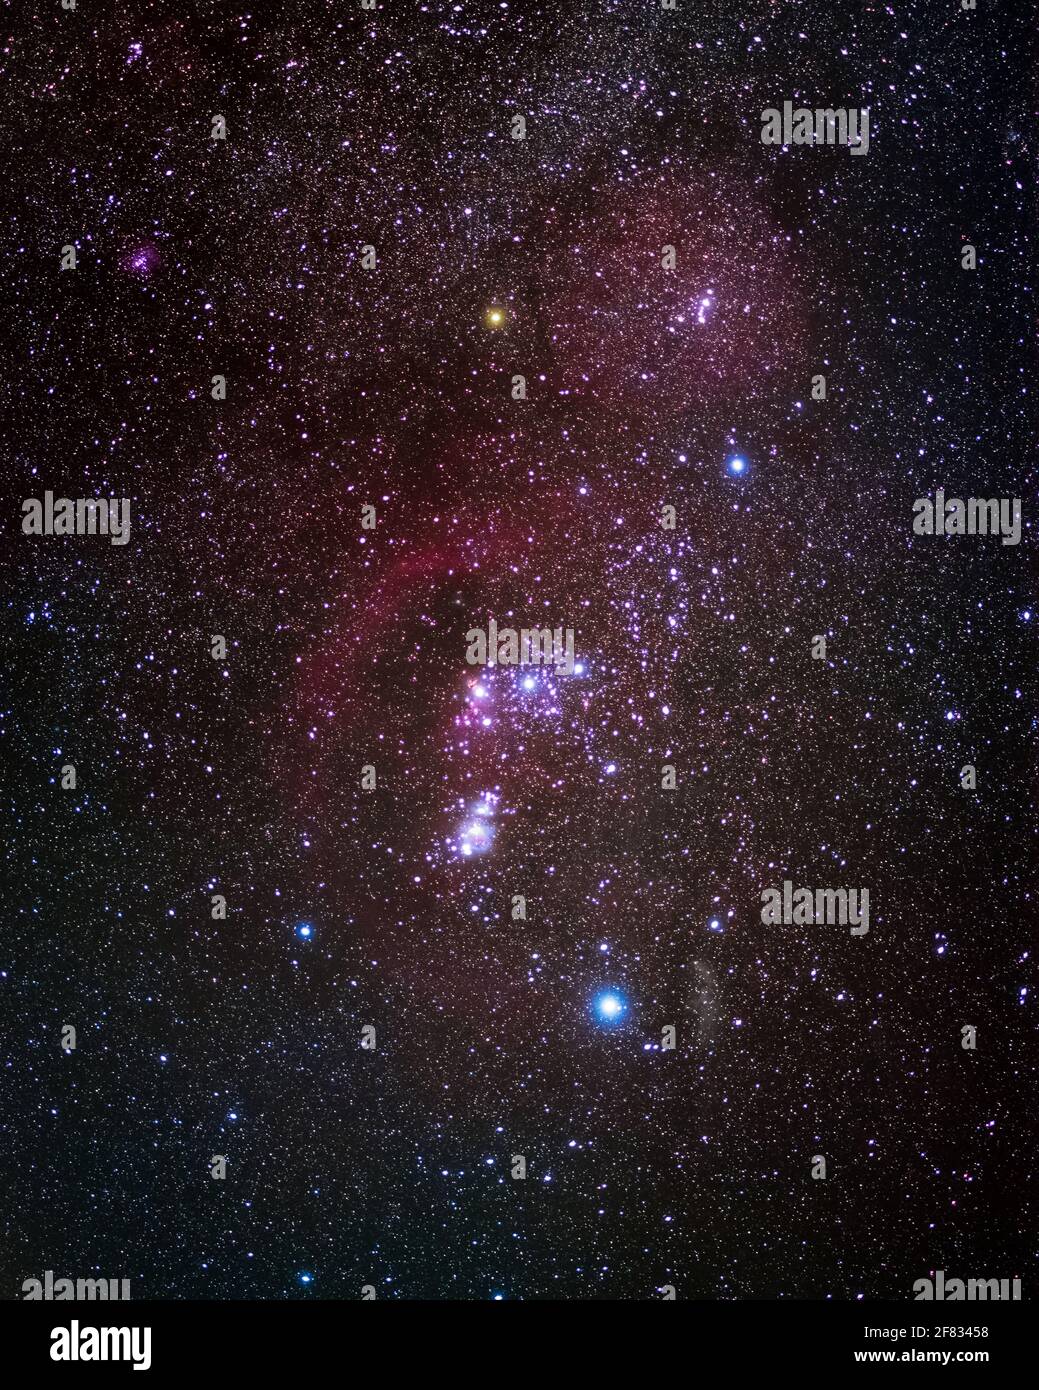 The Orion Molecular Cloud Complex showing its many colorful nebula alongside the Winter Milky Way, taken in Shenandoah National Park. Stock Photo